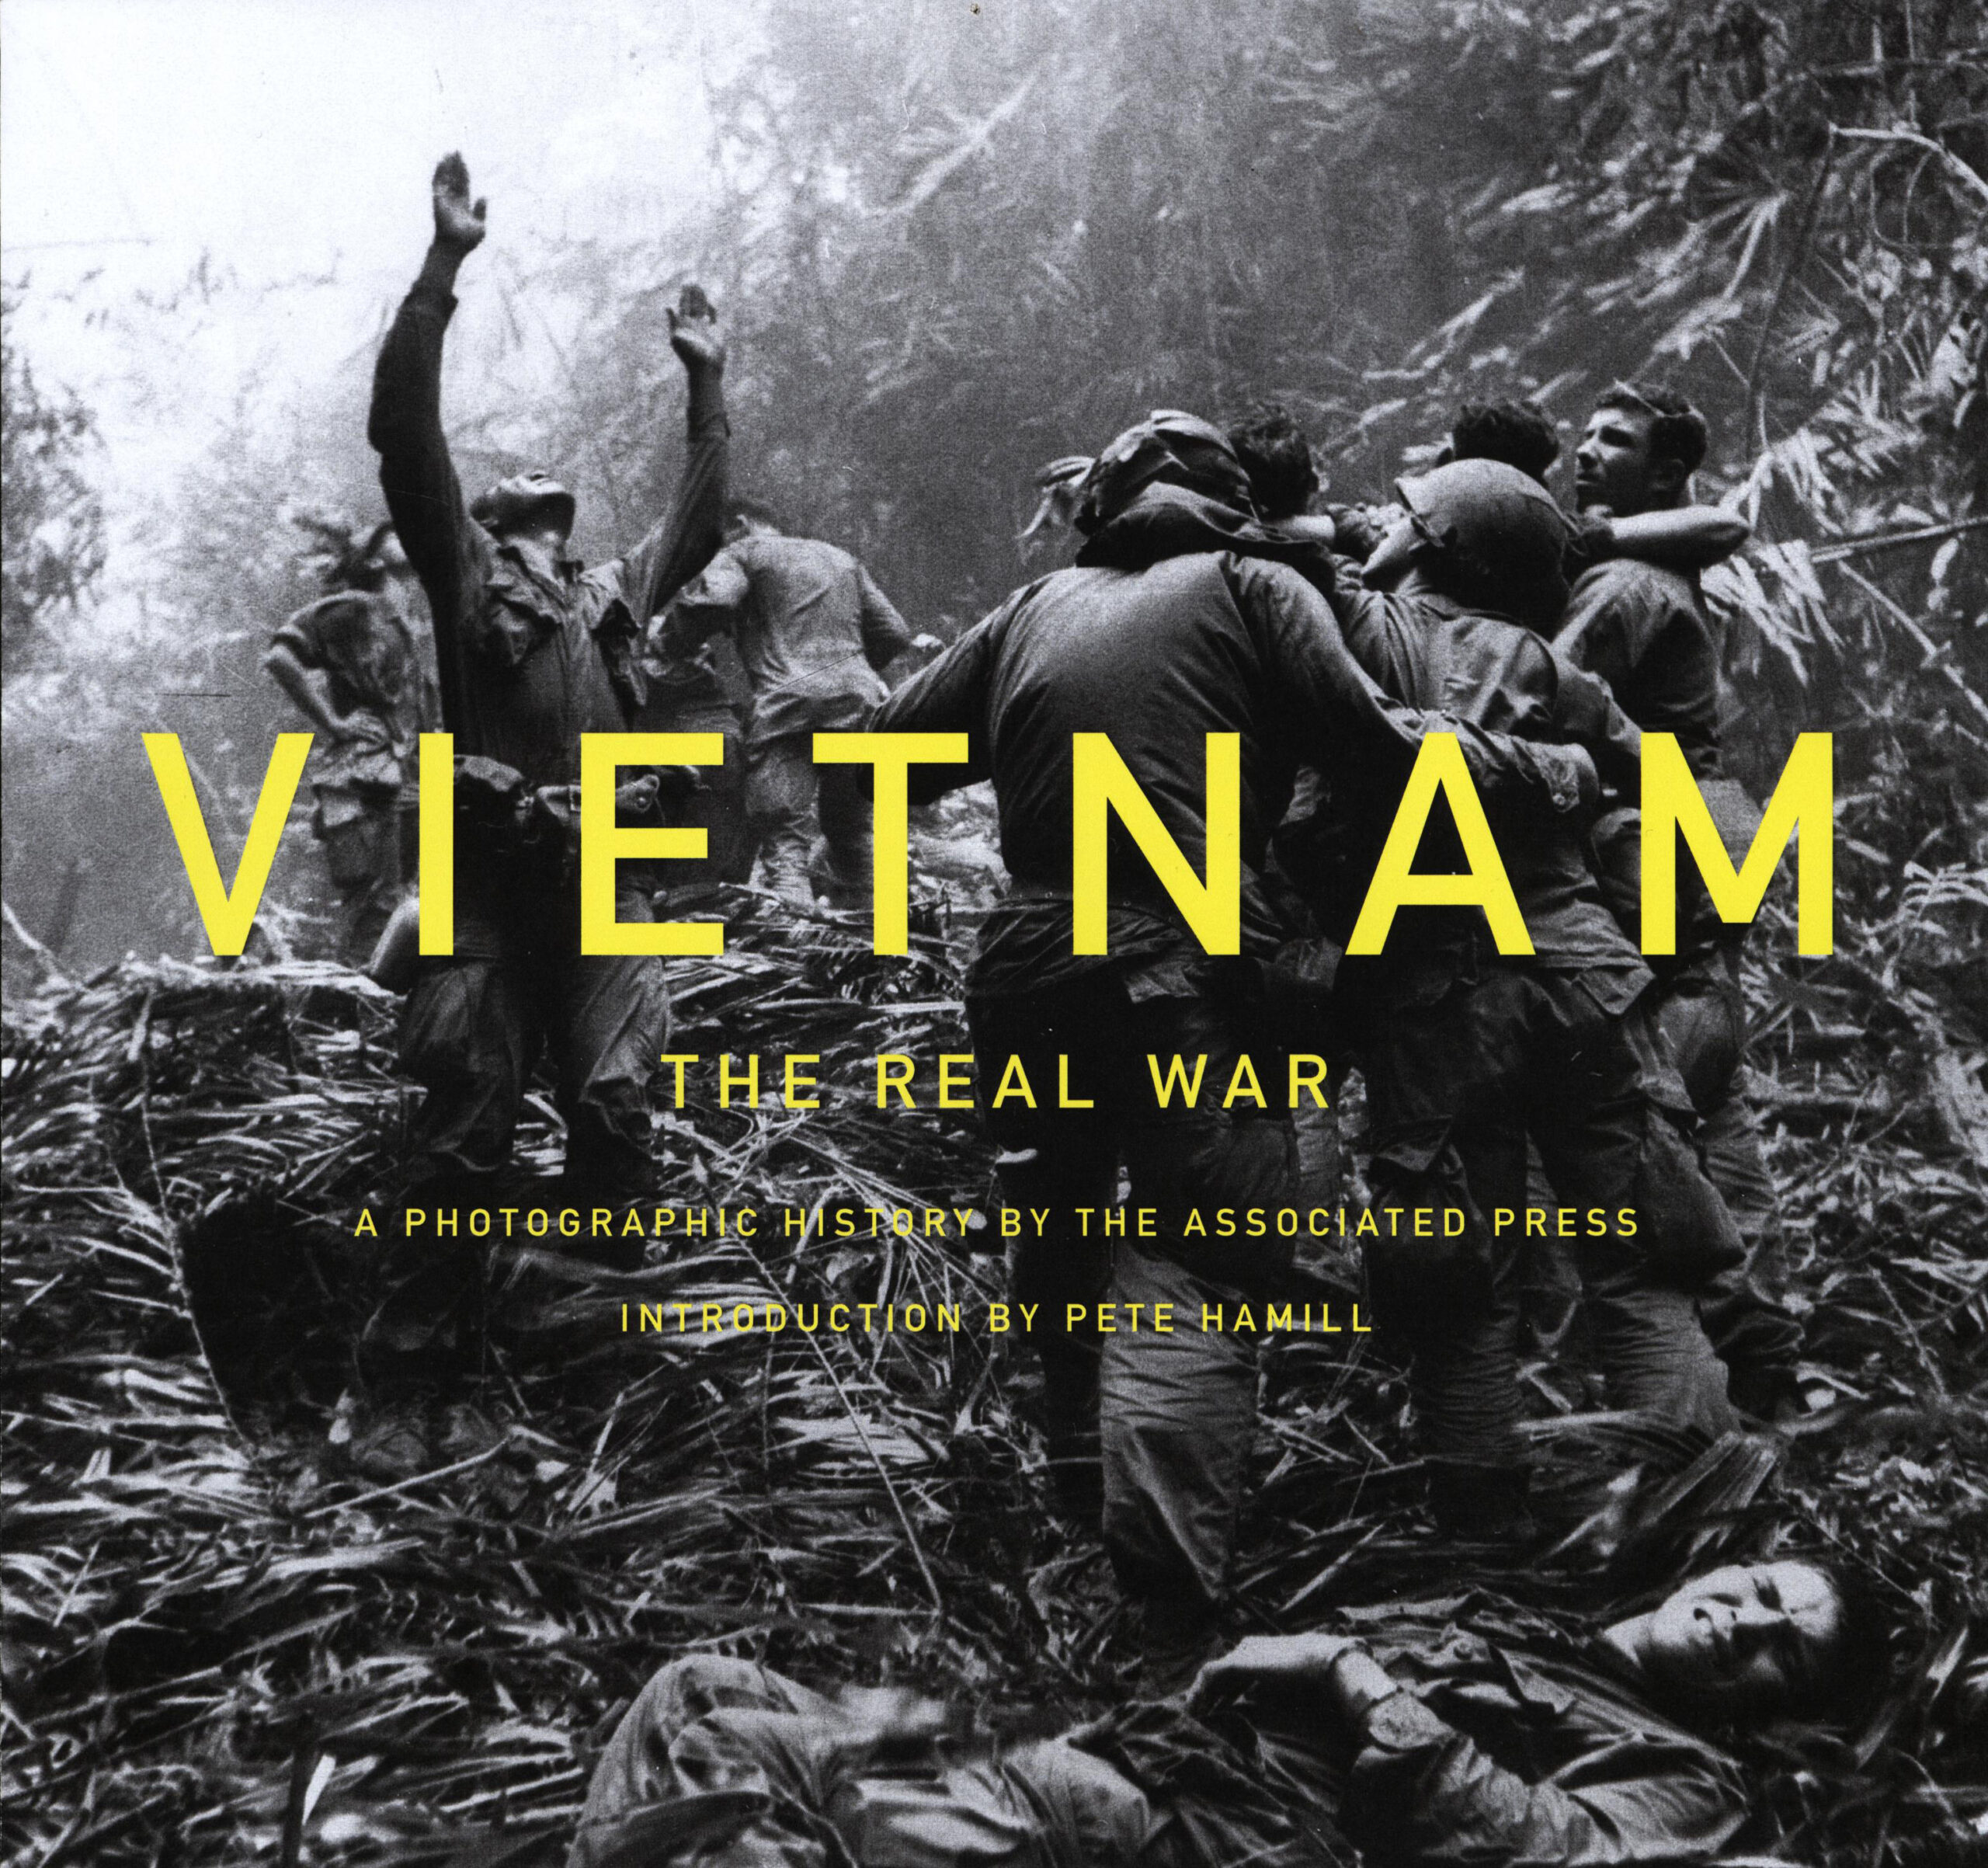 "Vietnam: The Real War" (Abrams; Oct. 1, 2013; 304 pages; 300 photographs; US $40.00/CAN $45.00/UK £25)